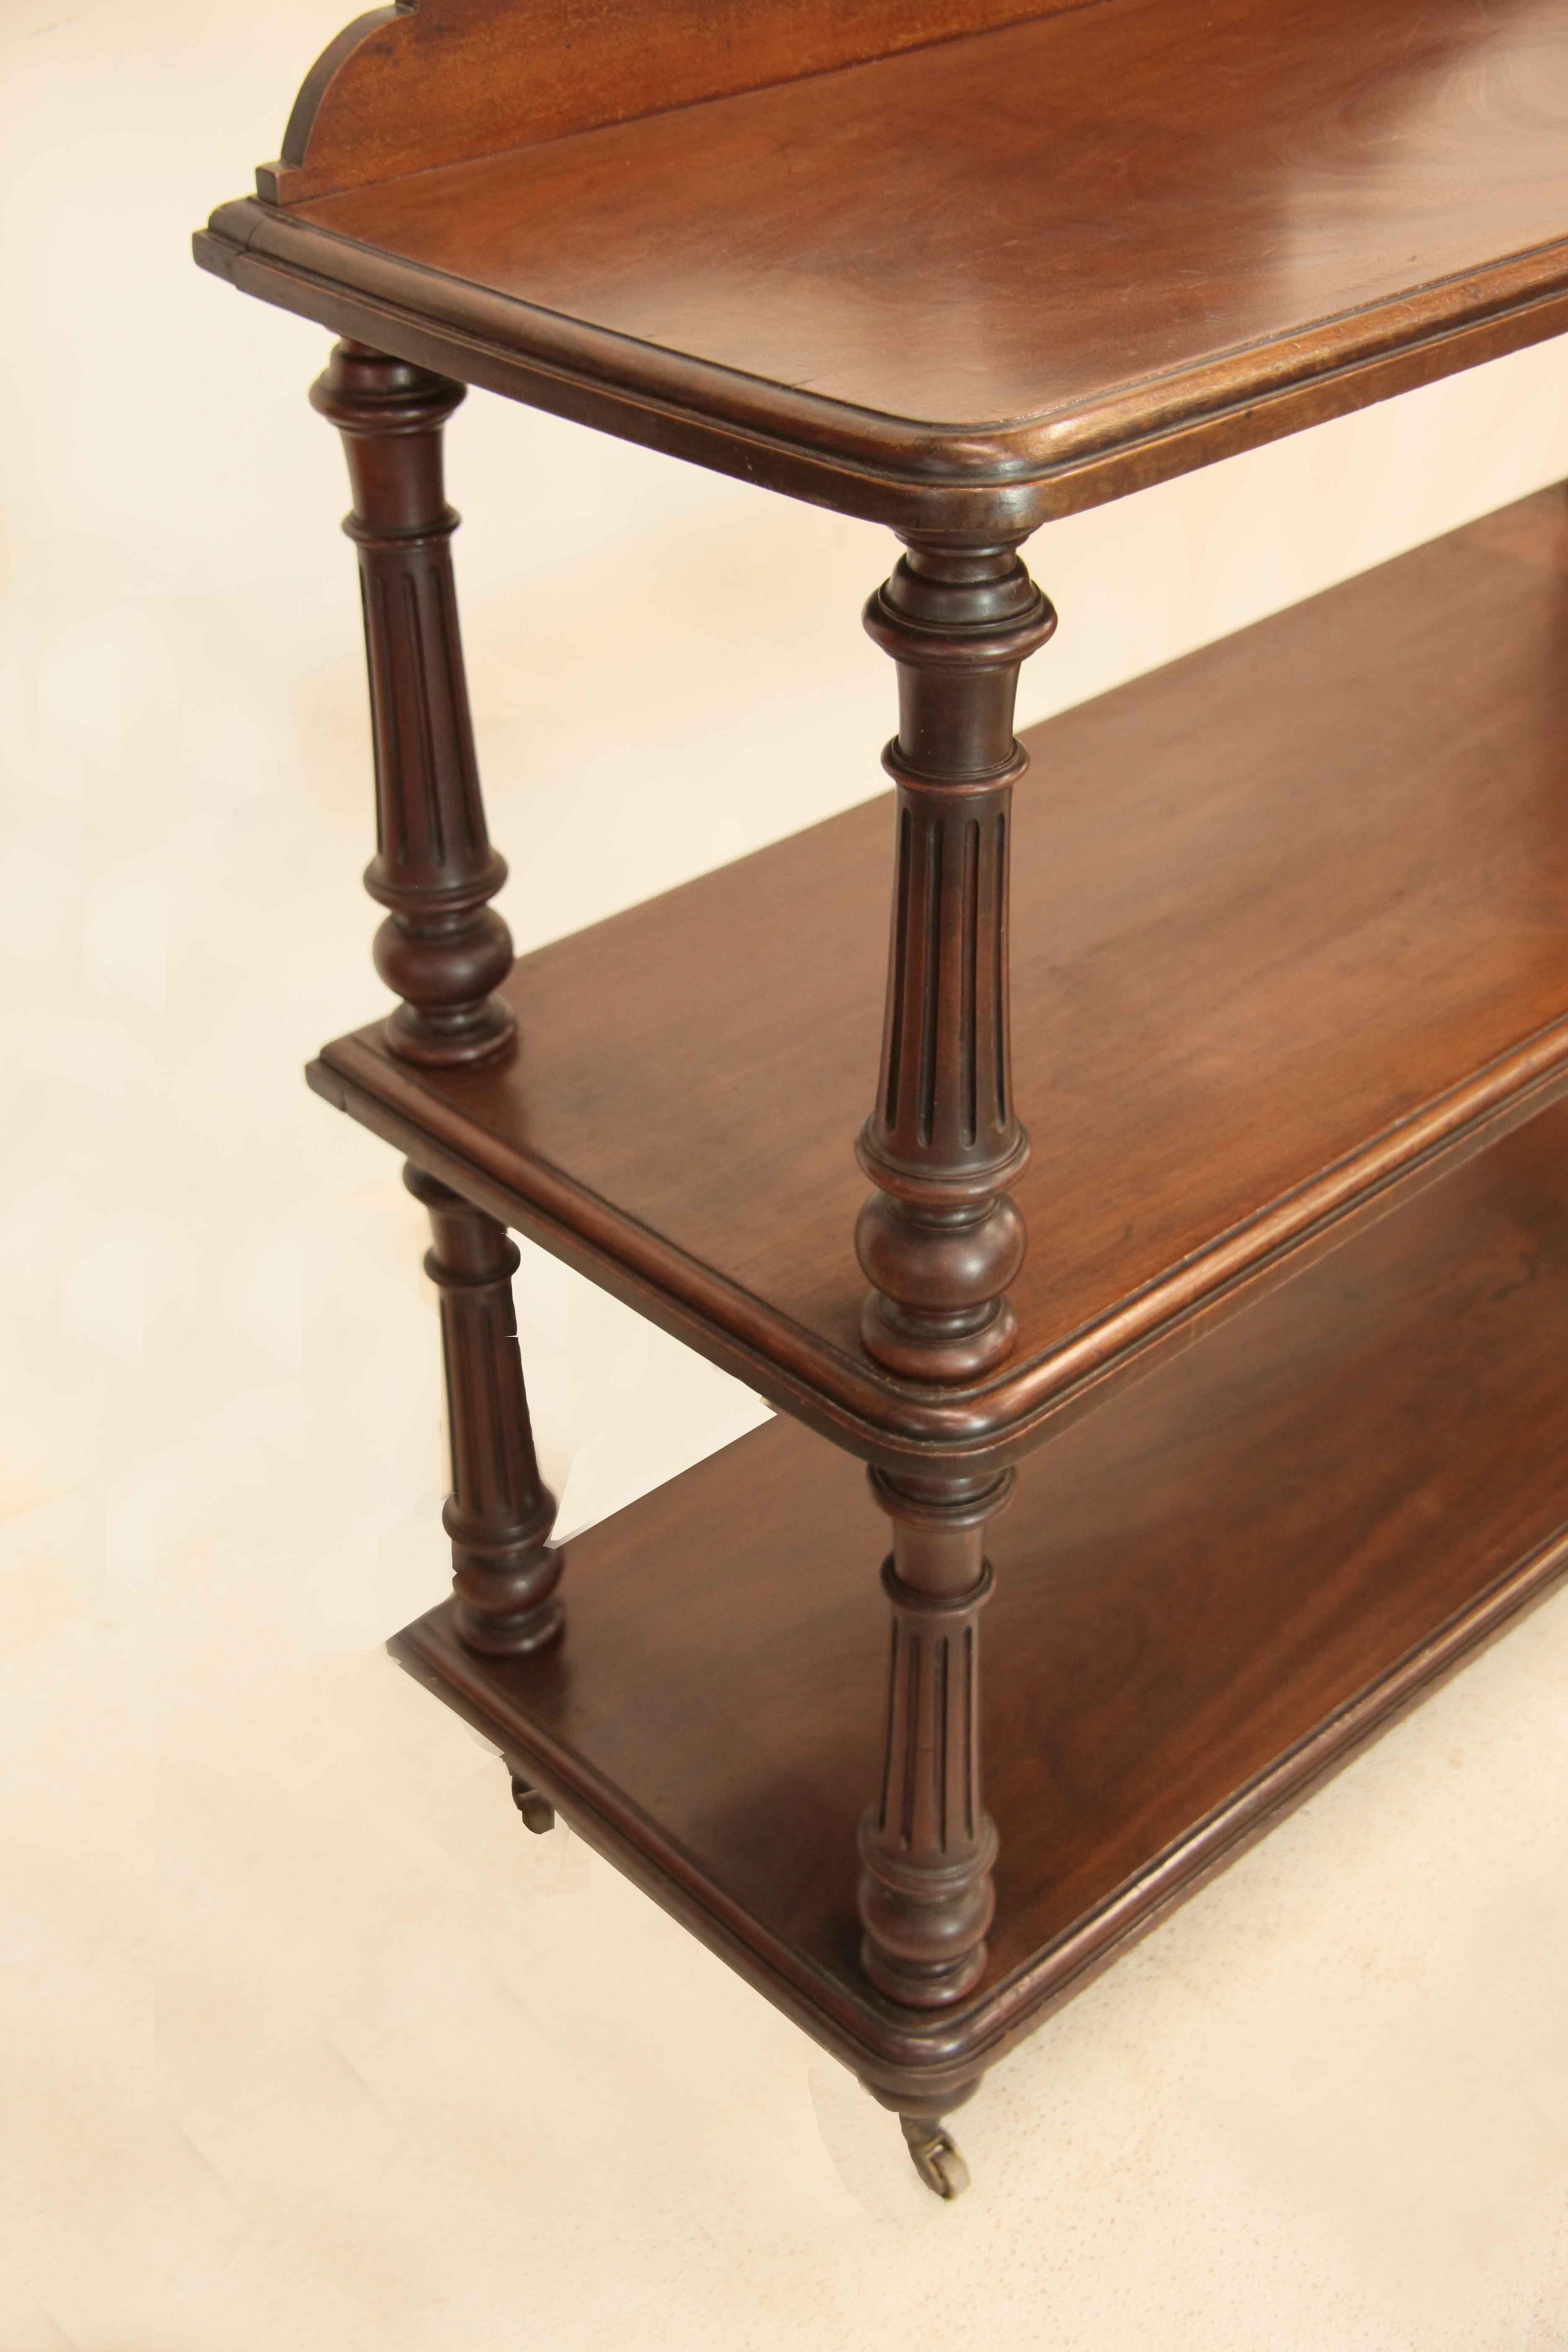 English mahogany three tier buffet, with shapely gallery back, the three surfaces with beautiful color and patina( top surface with minor indentions, see photo), surface edges with cove molding; columns with bold turnings and reeding, resting on